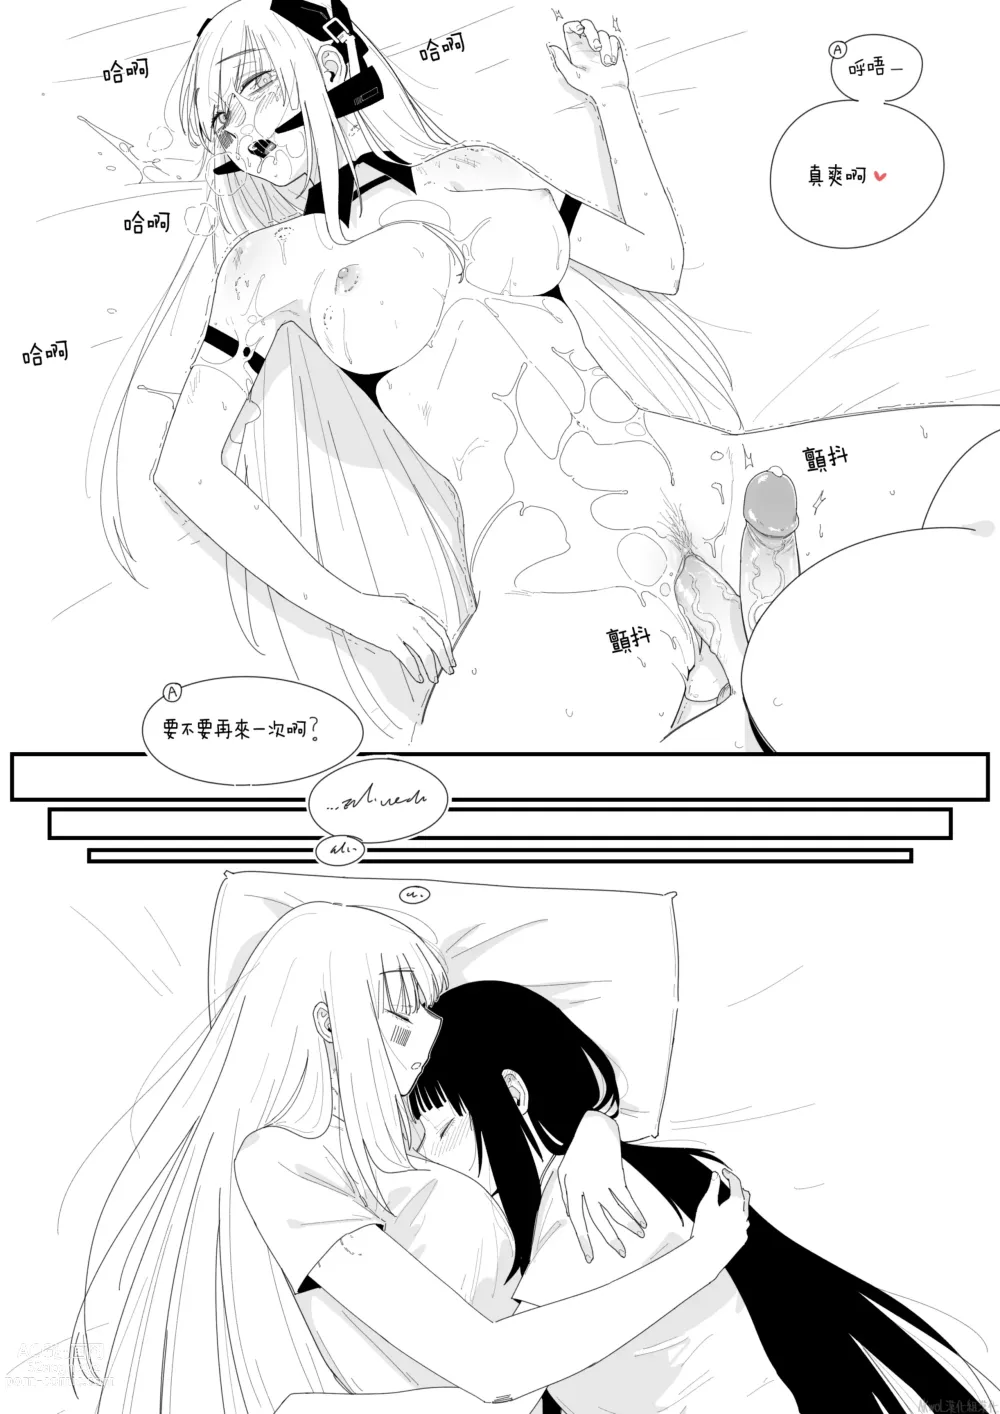 Page 17 of doujinshi Archi-Gager part 1-2 (decensored)